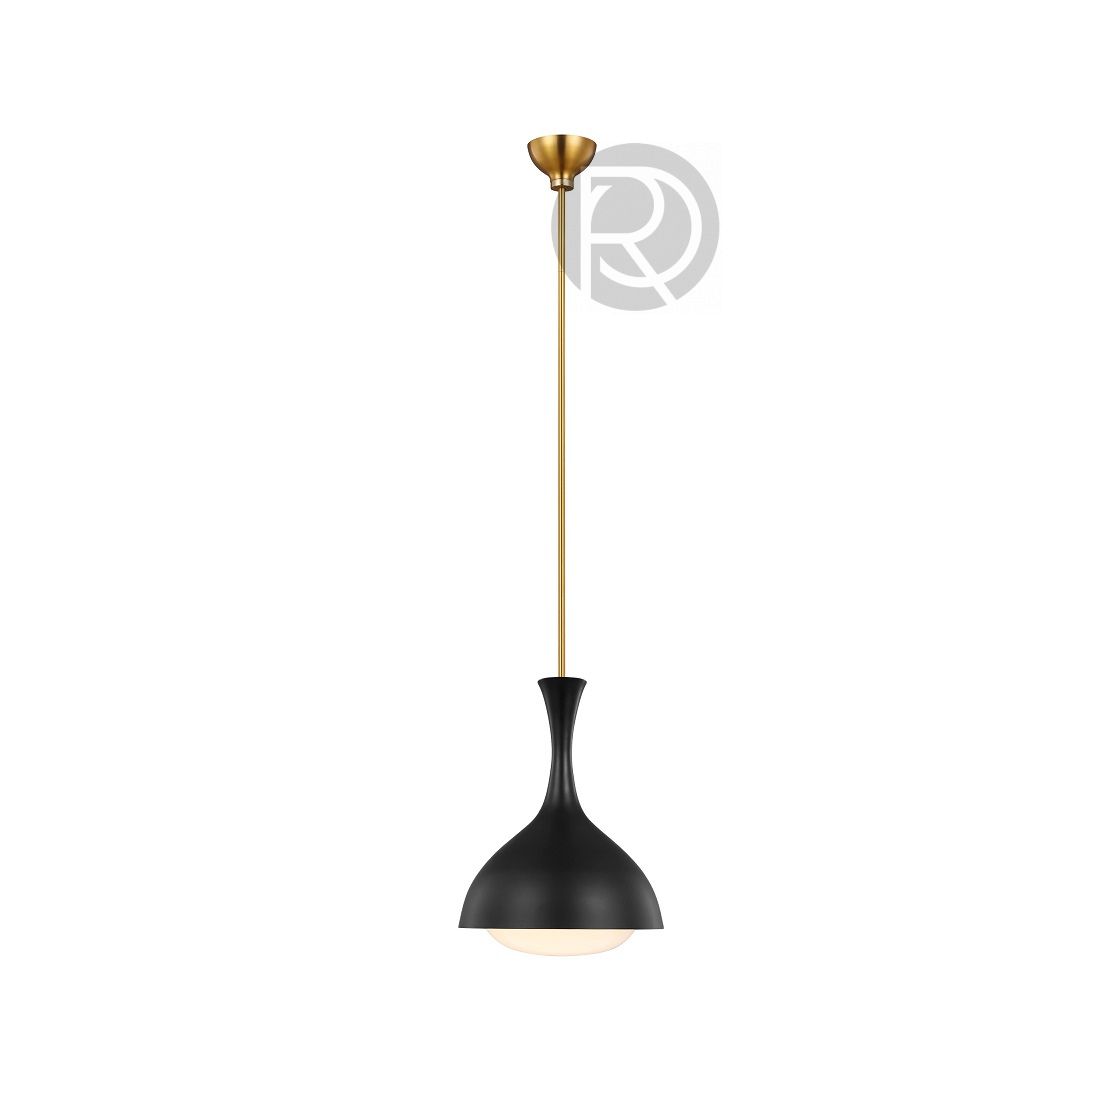 Hanging lamp LUCERNE by Visual Comfort